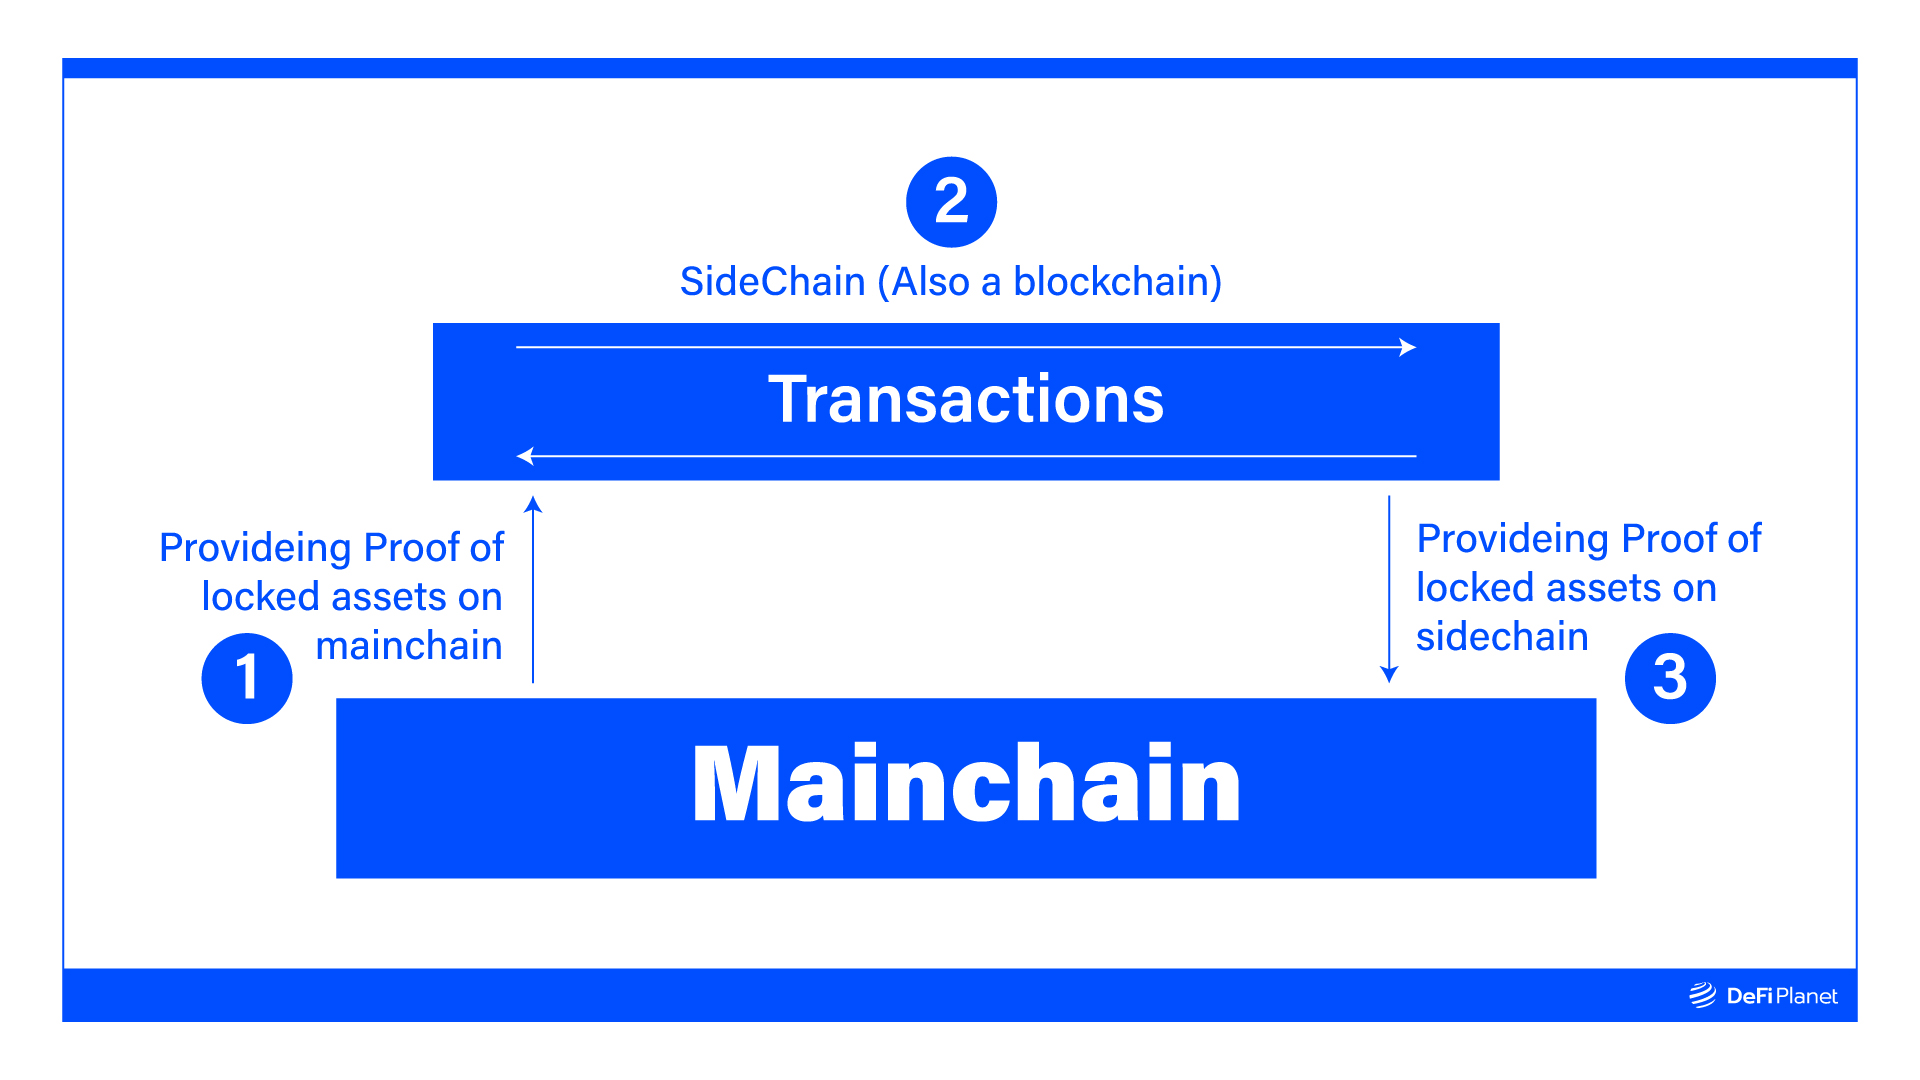 Image showing the architectural set ups of Sidechains 